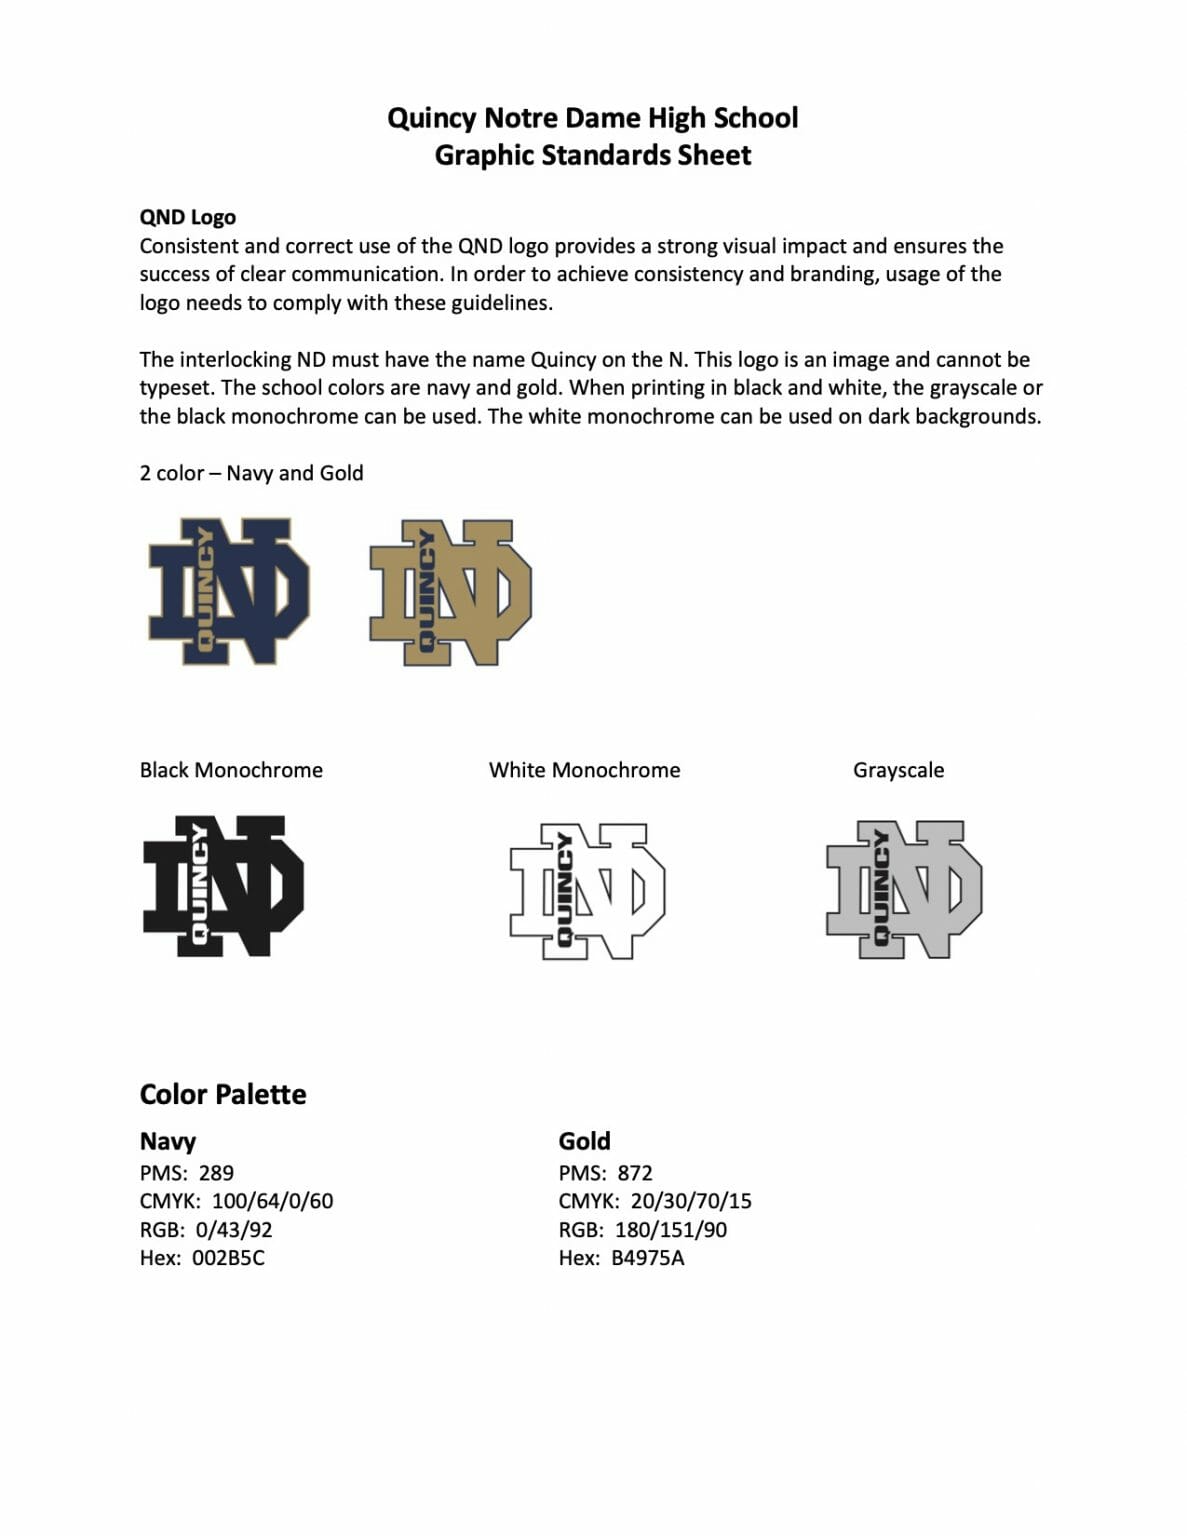 QND Graphic Standards Sheet